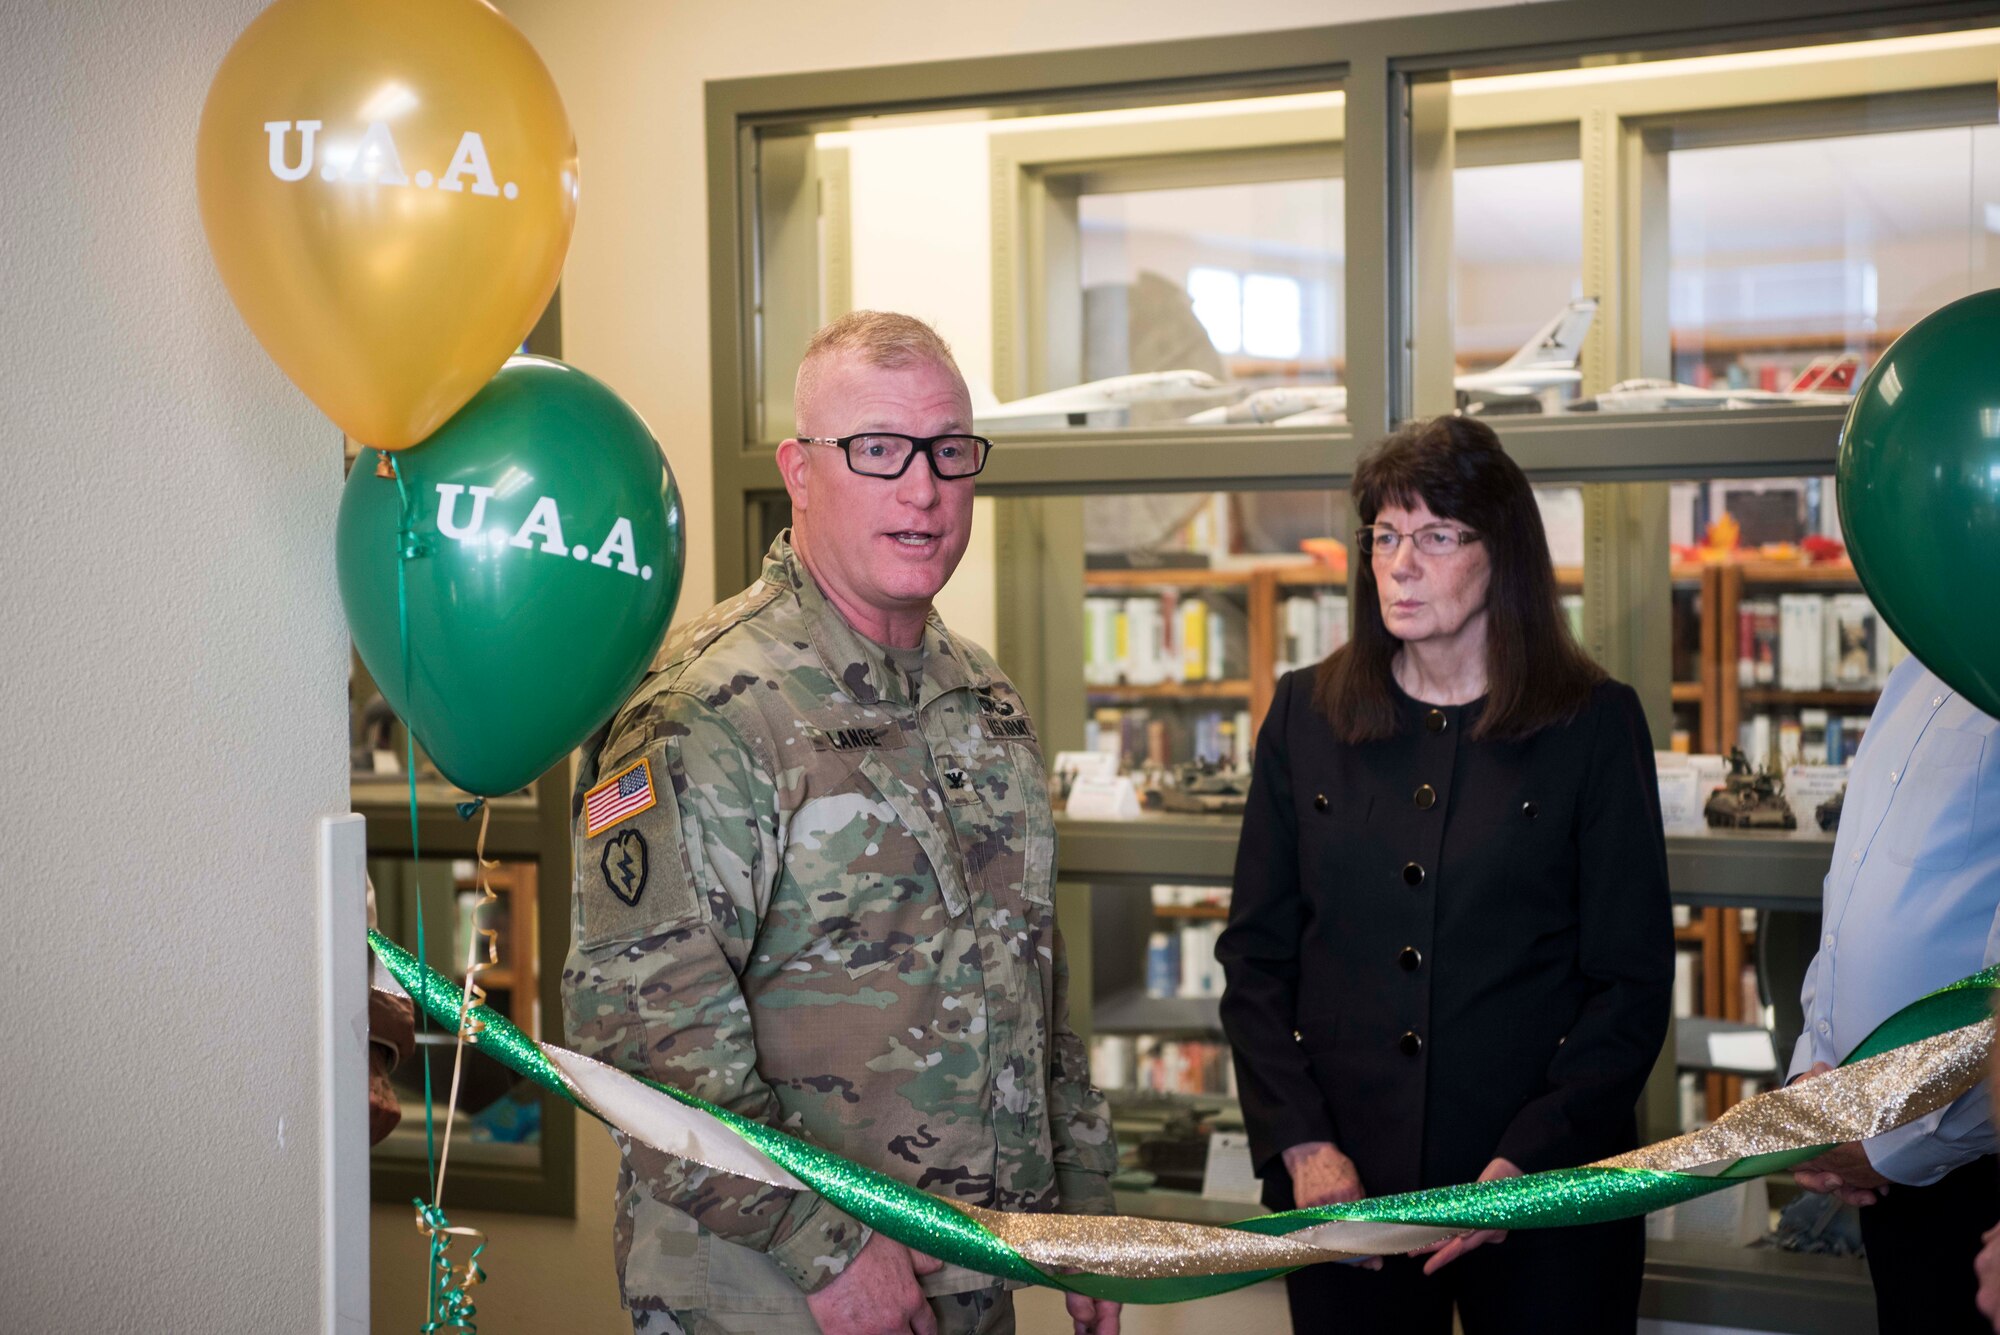 U.S. Army Col. Adam Lange, 673d Air Base Wing vice commander, gives a speech during a ribbon-cutting ceremony at the Joint Base Elmendorf-Richardson Education Center Nov. 2, 2018. The ceremony marks the opening of the academic tutoring room sponsored by the University of Alaska Anchorage (UAA). This room is open to all active-duty personnel, dependents and veterans, no matter which school they attend.